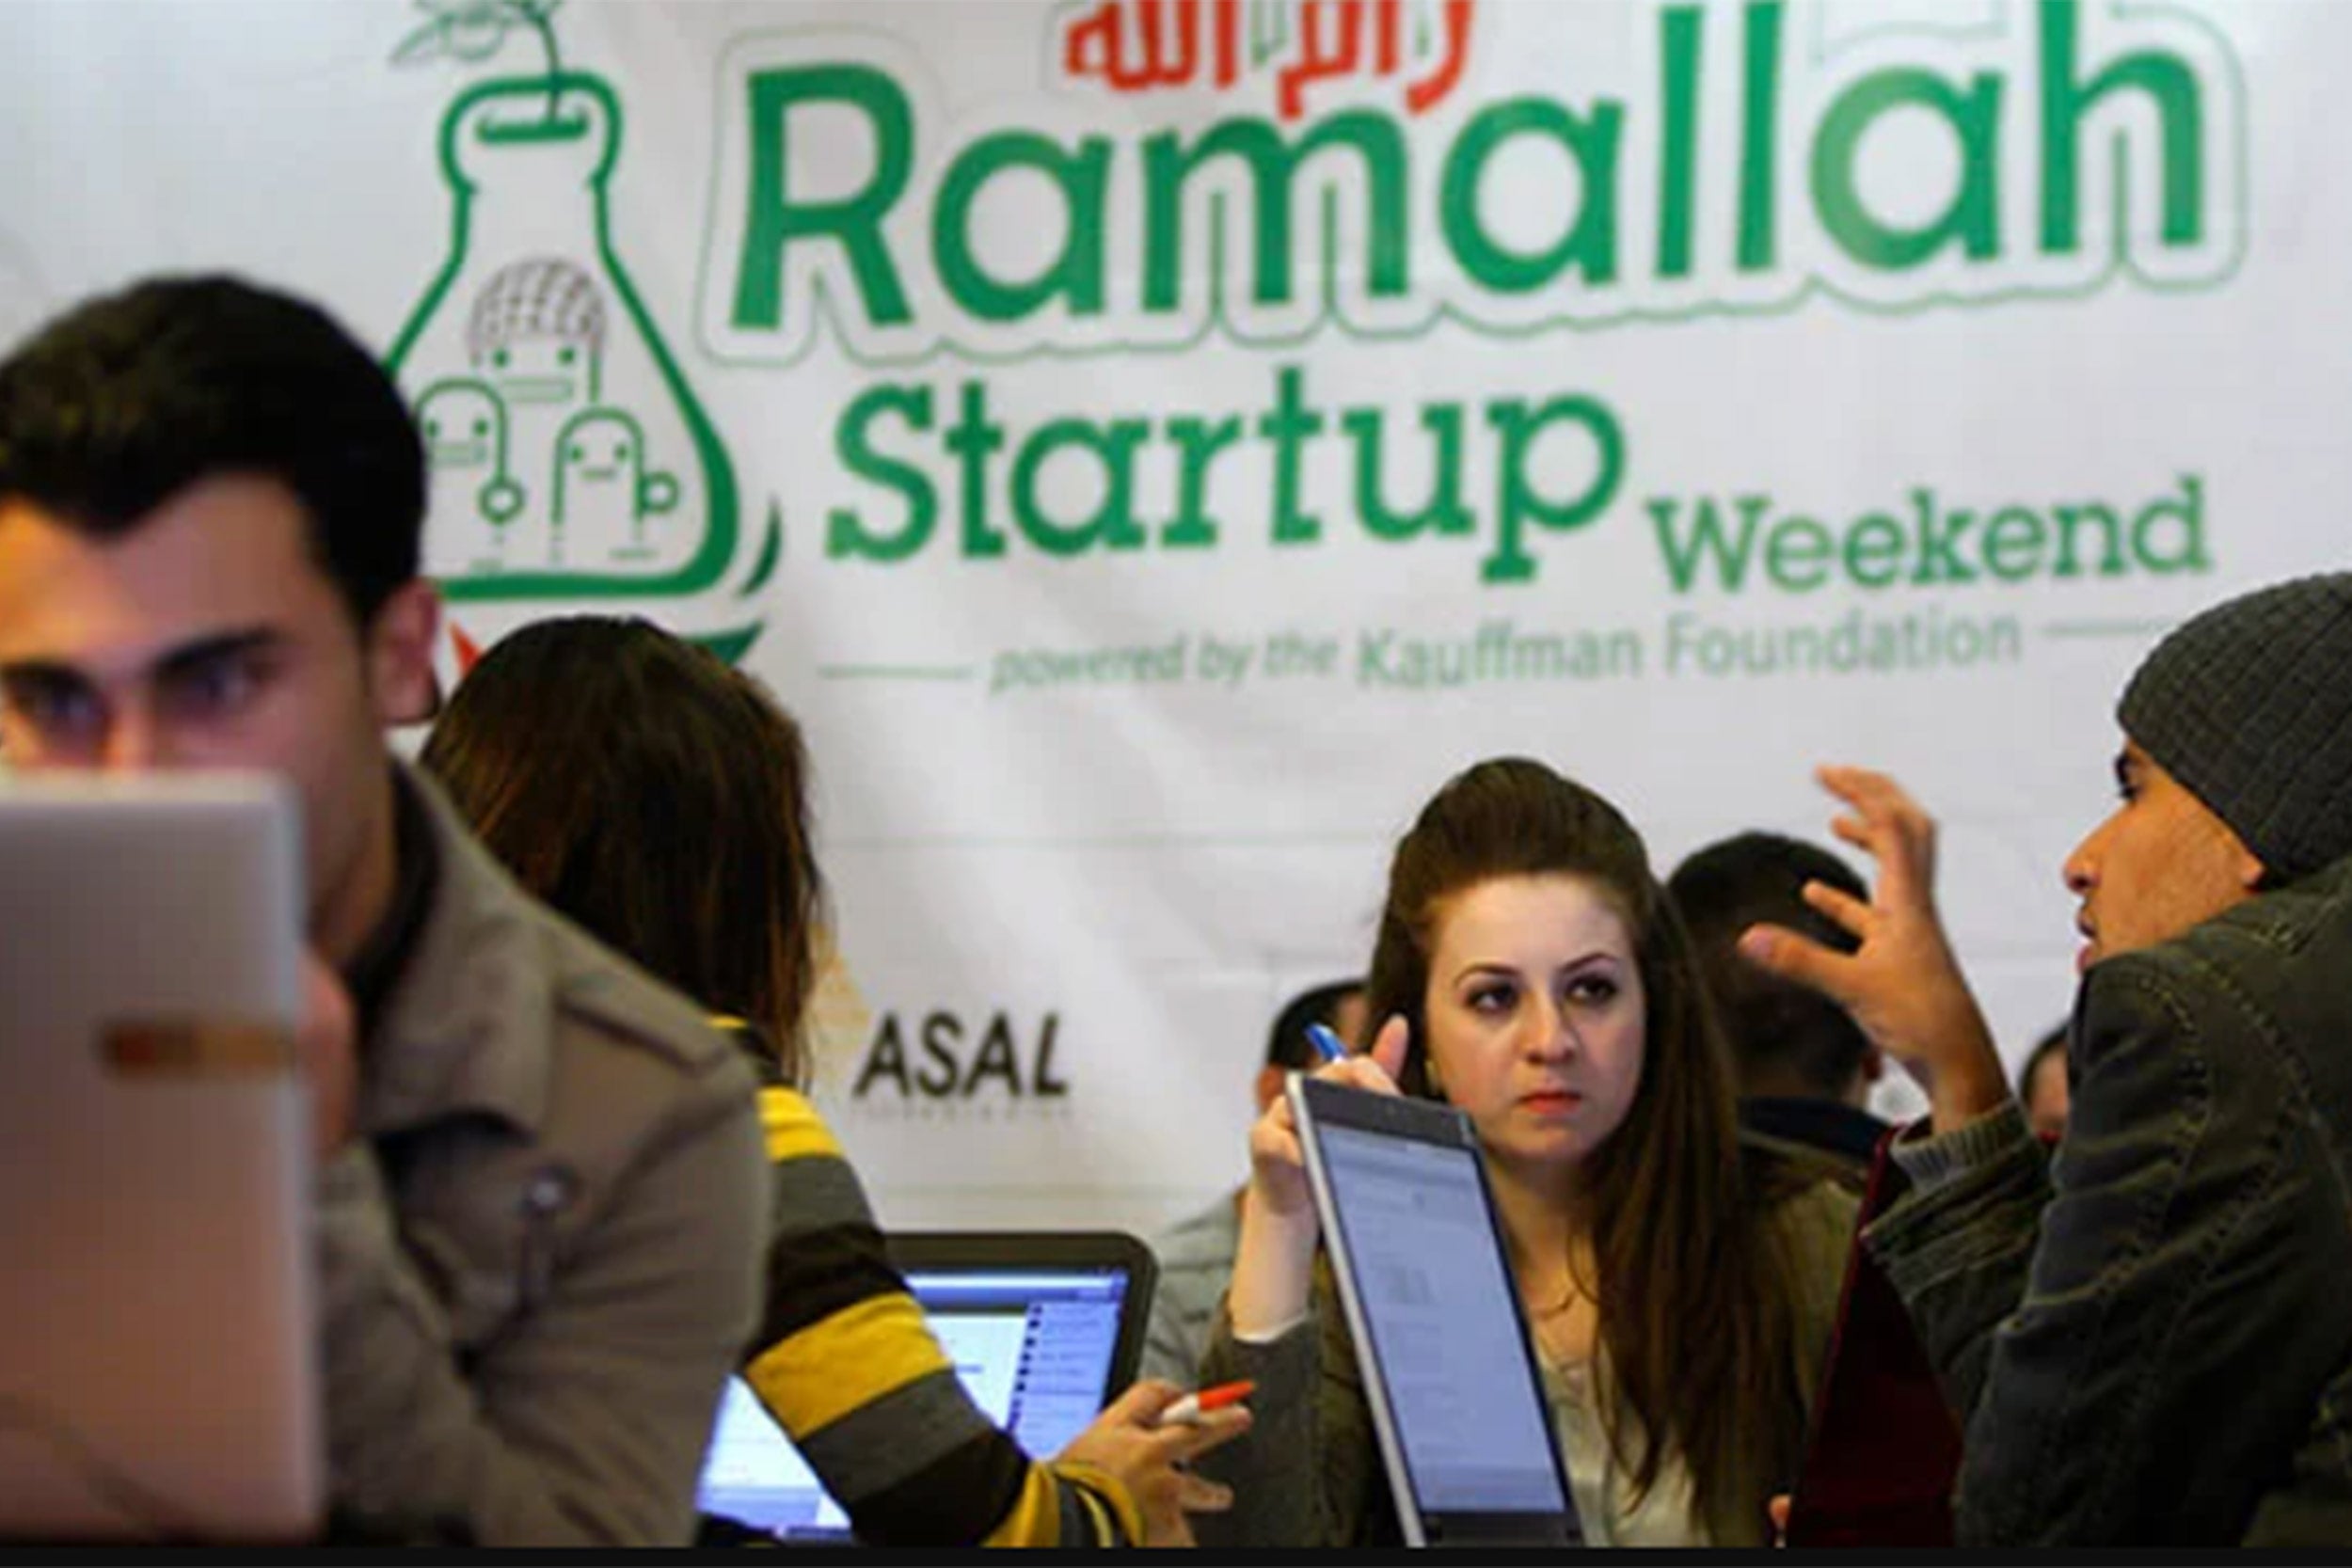 Palestinian programmers attend a Ramallah Startup Weekend workshop in the West Bank city of Ramallah.